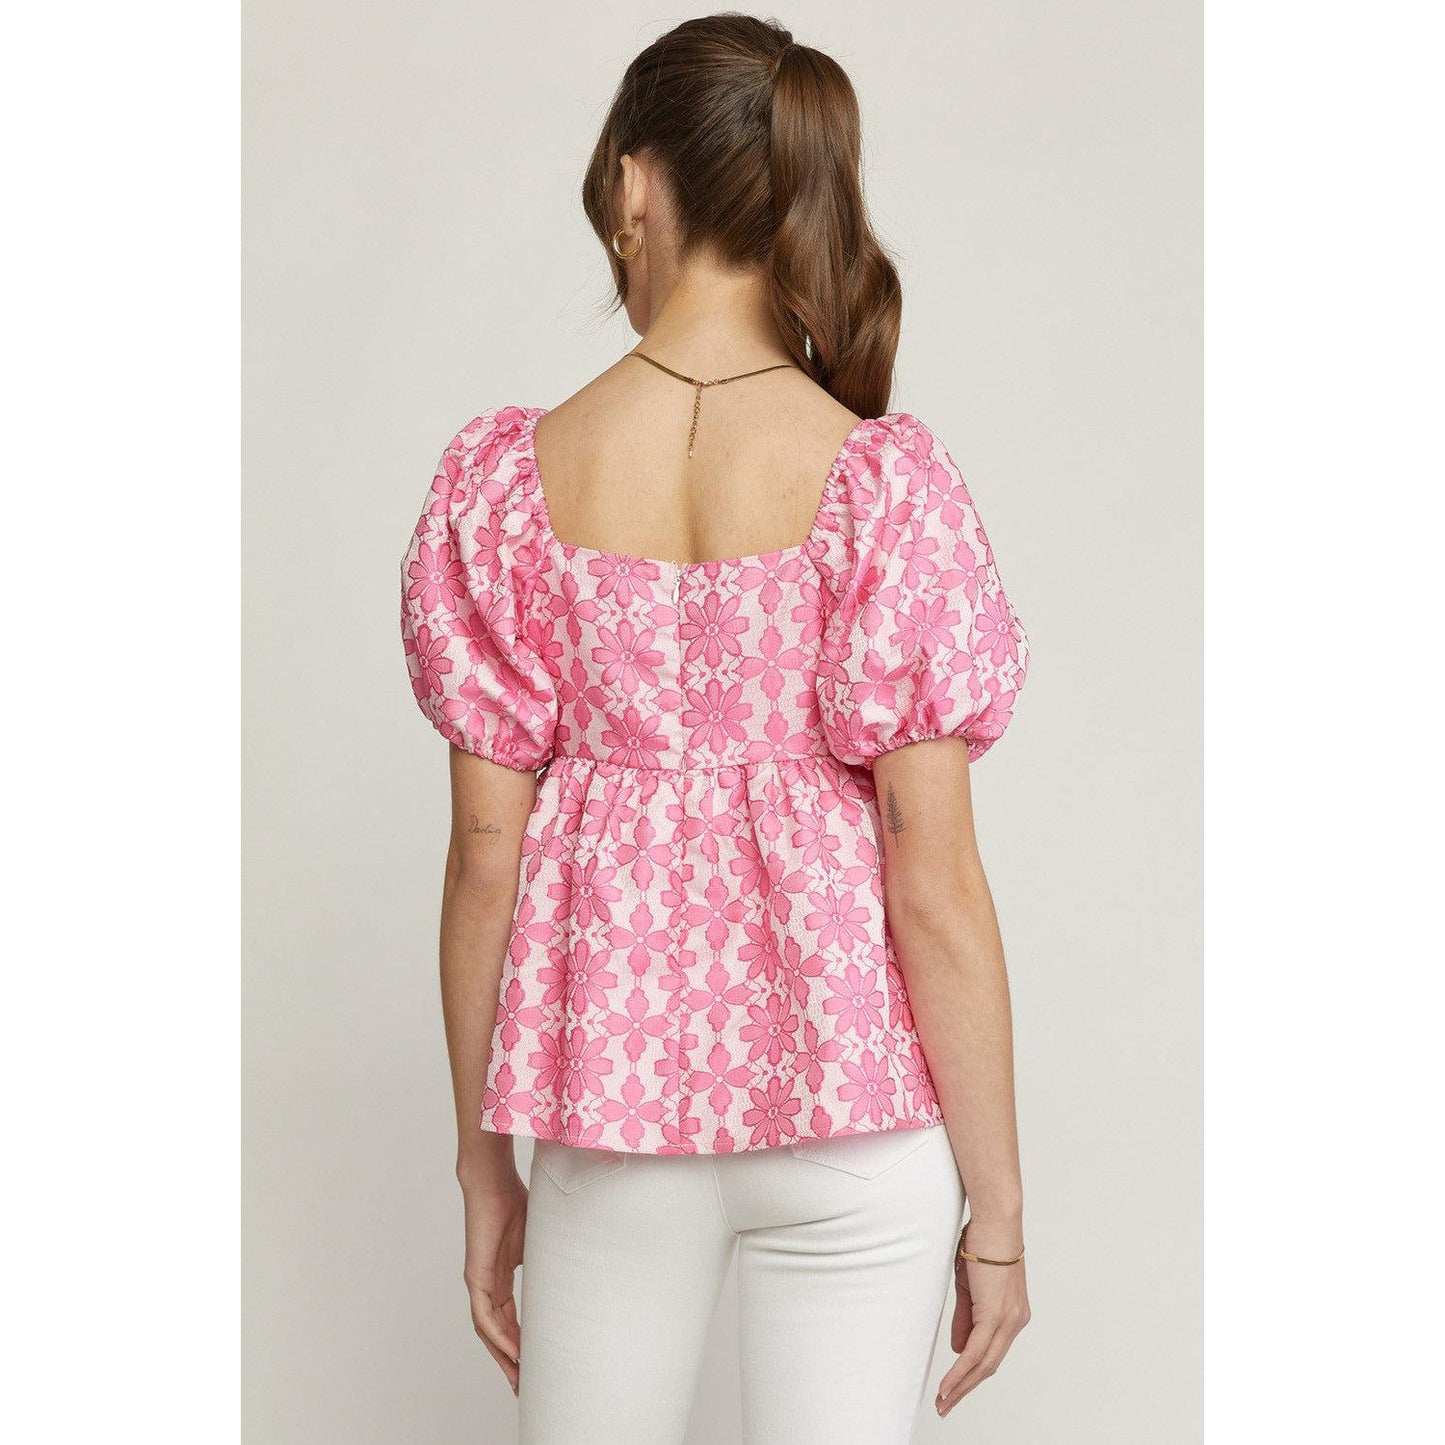 Floral jacquard top in pink